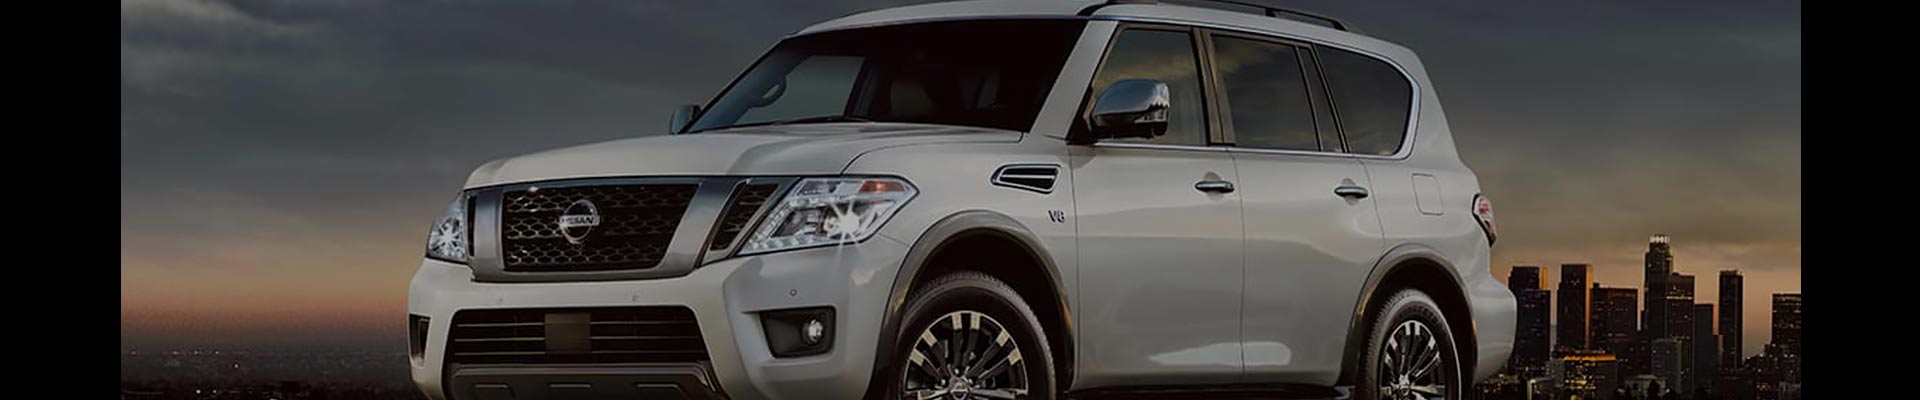 Shop Replacement and OEM 2005 Nissan Armada Parts with Discounted Price on the Net